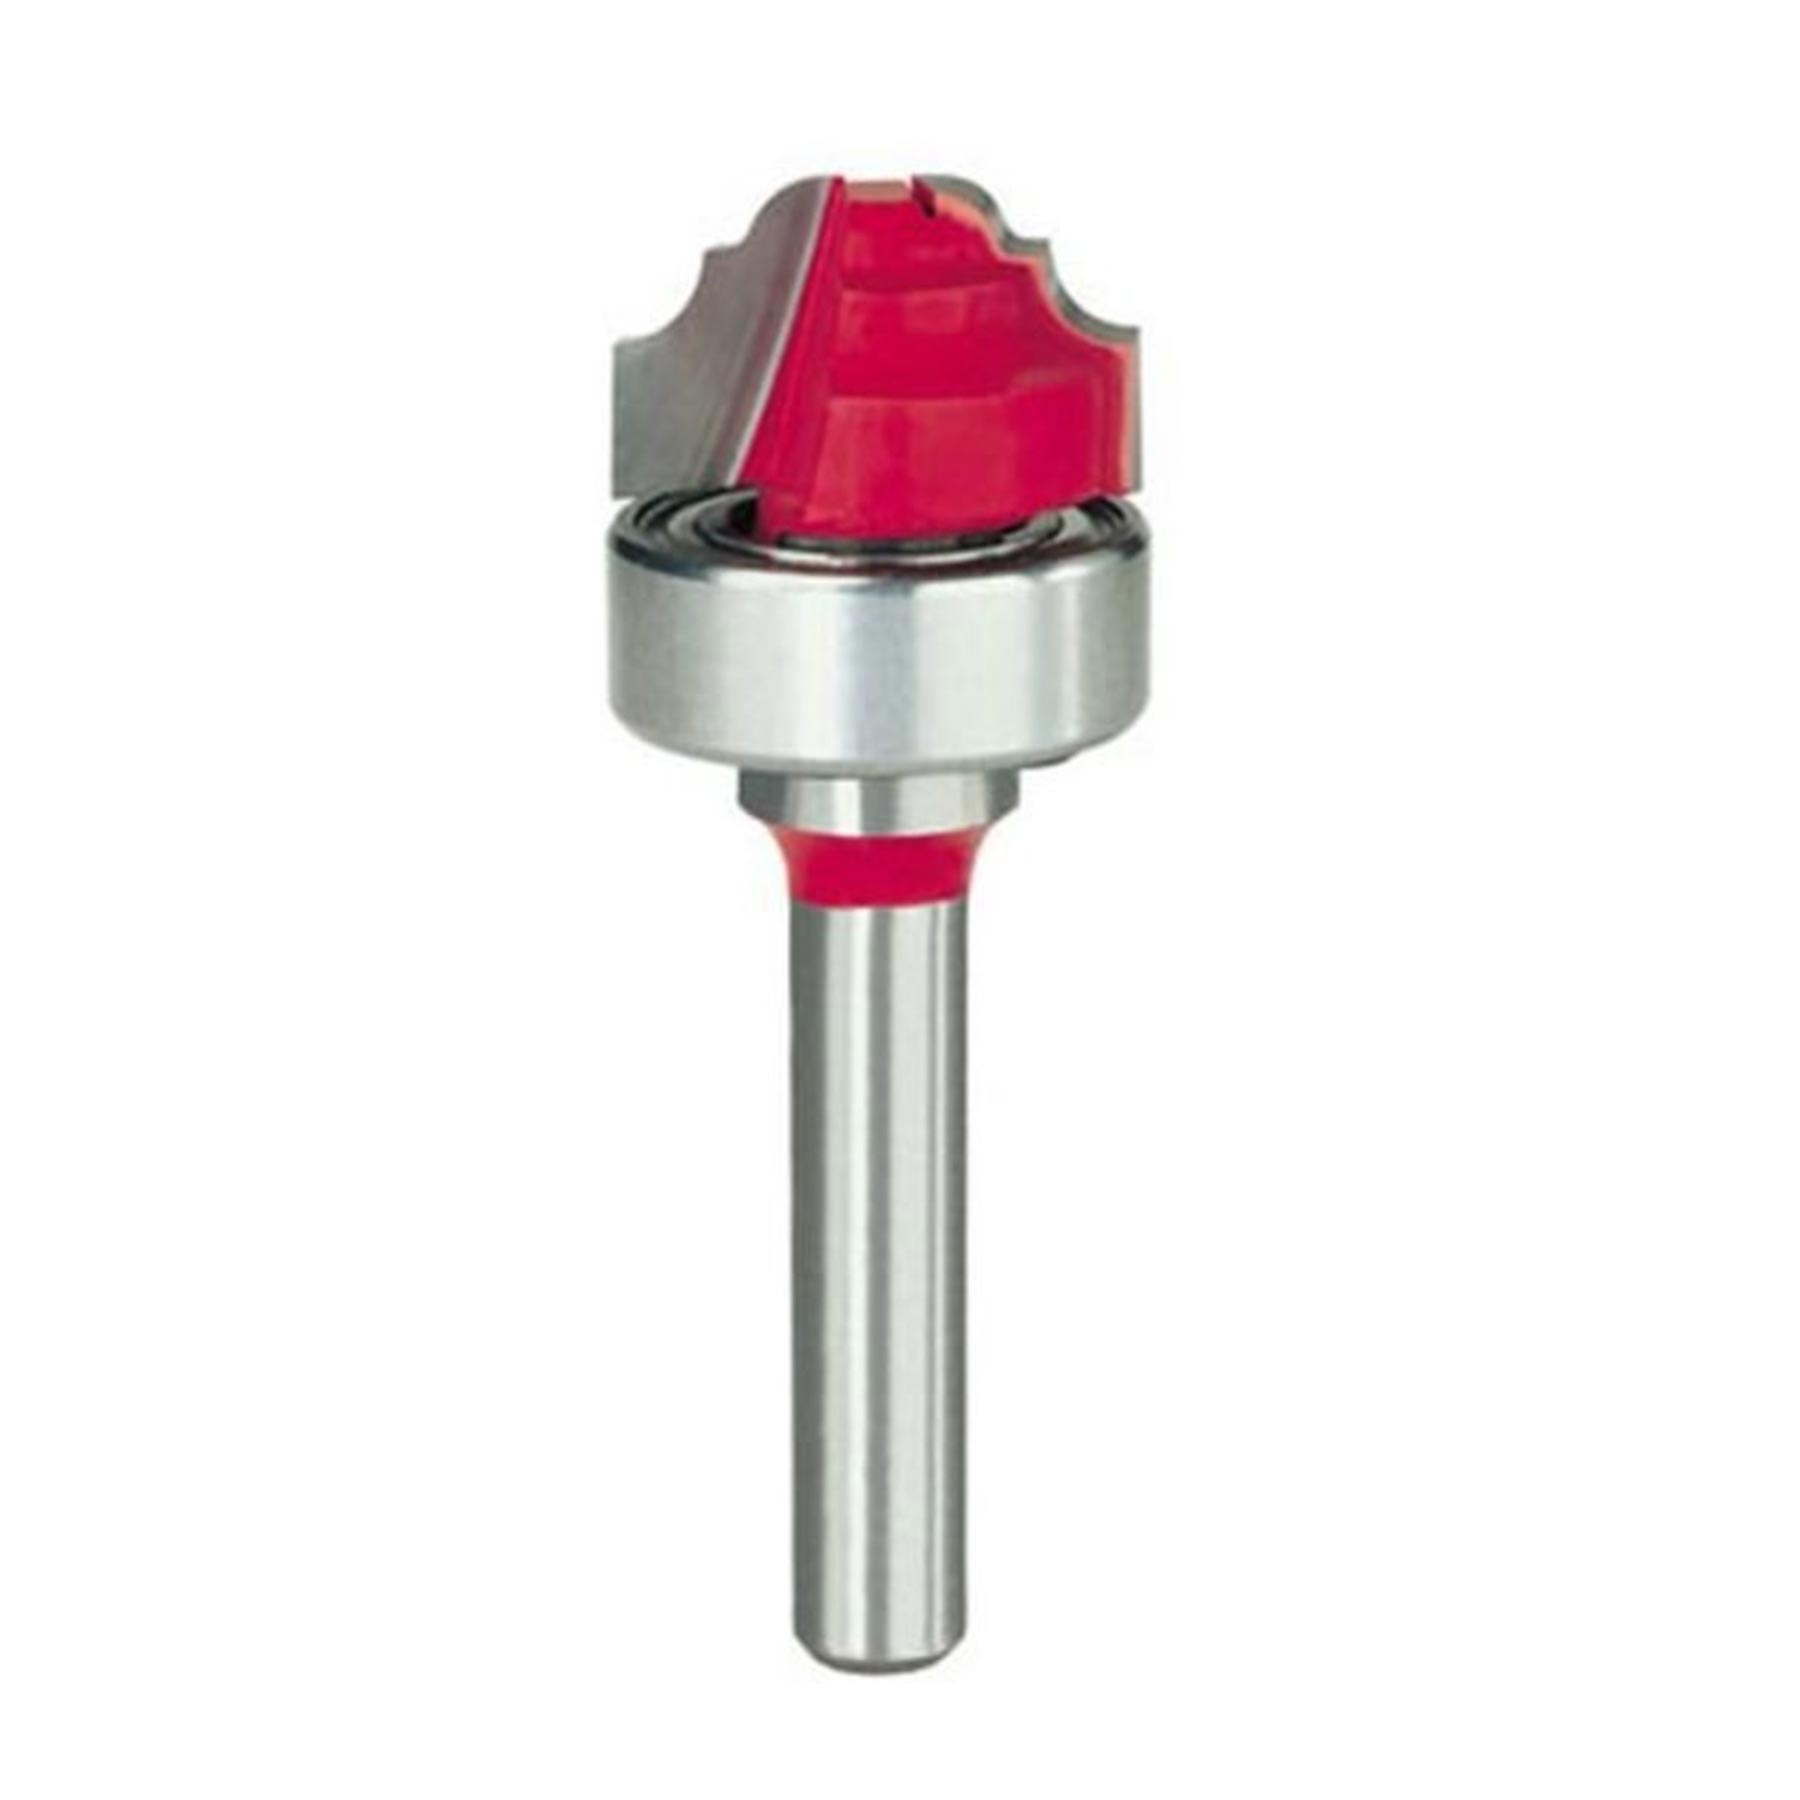 39-502 Classical Cove And Bead Groove Router Bit With Top Bearing 1/4" Sh 3/4" D 7/16" Cl